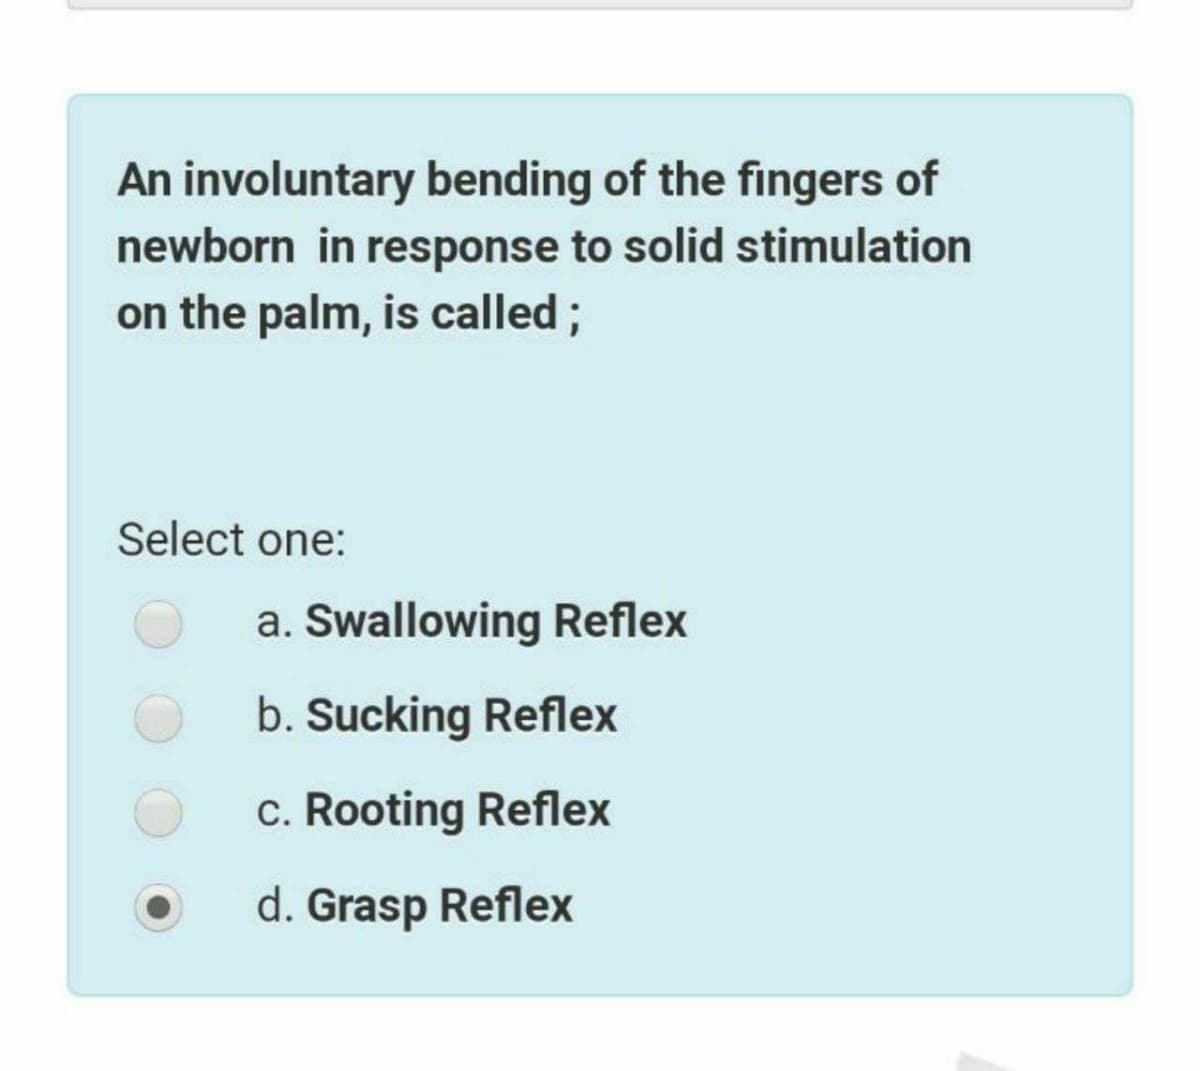 An involuntary bending of the fingers of
newborn in response to solid stimulation
on the palm, is called;
Select one:
a. Swallowing Reflex
b. Sucking Reflex
c. Rooting Reflex
d. Grasp Reflex
